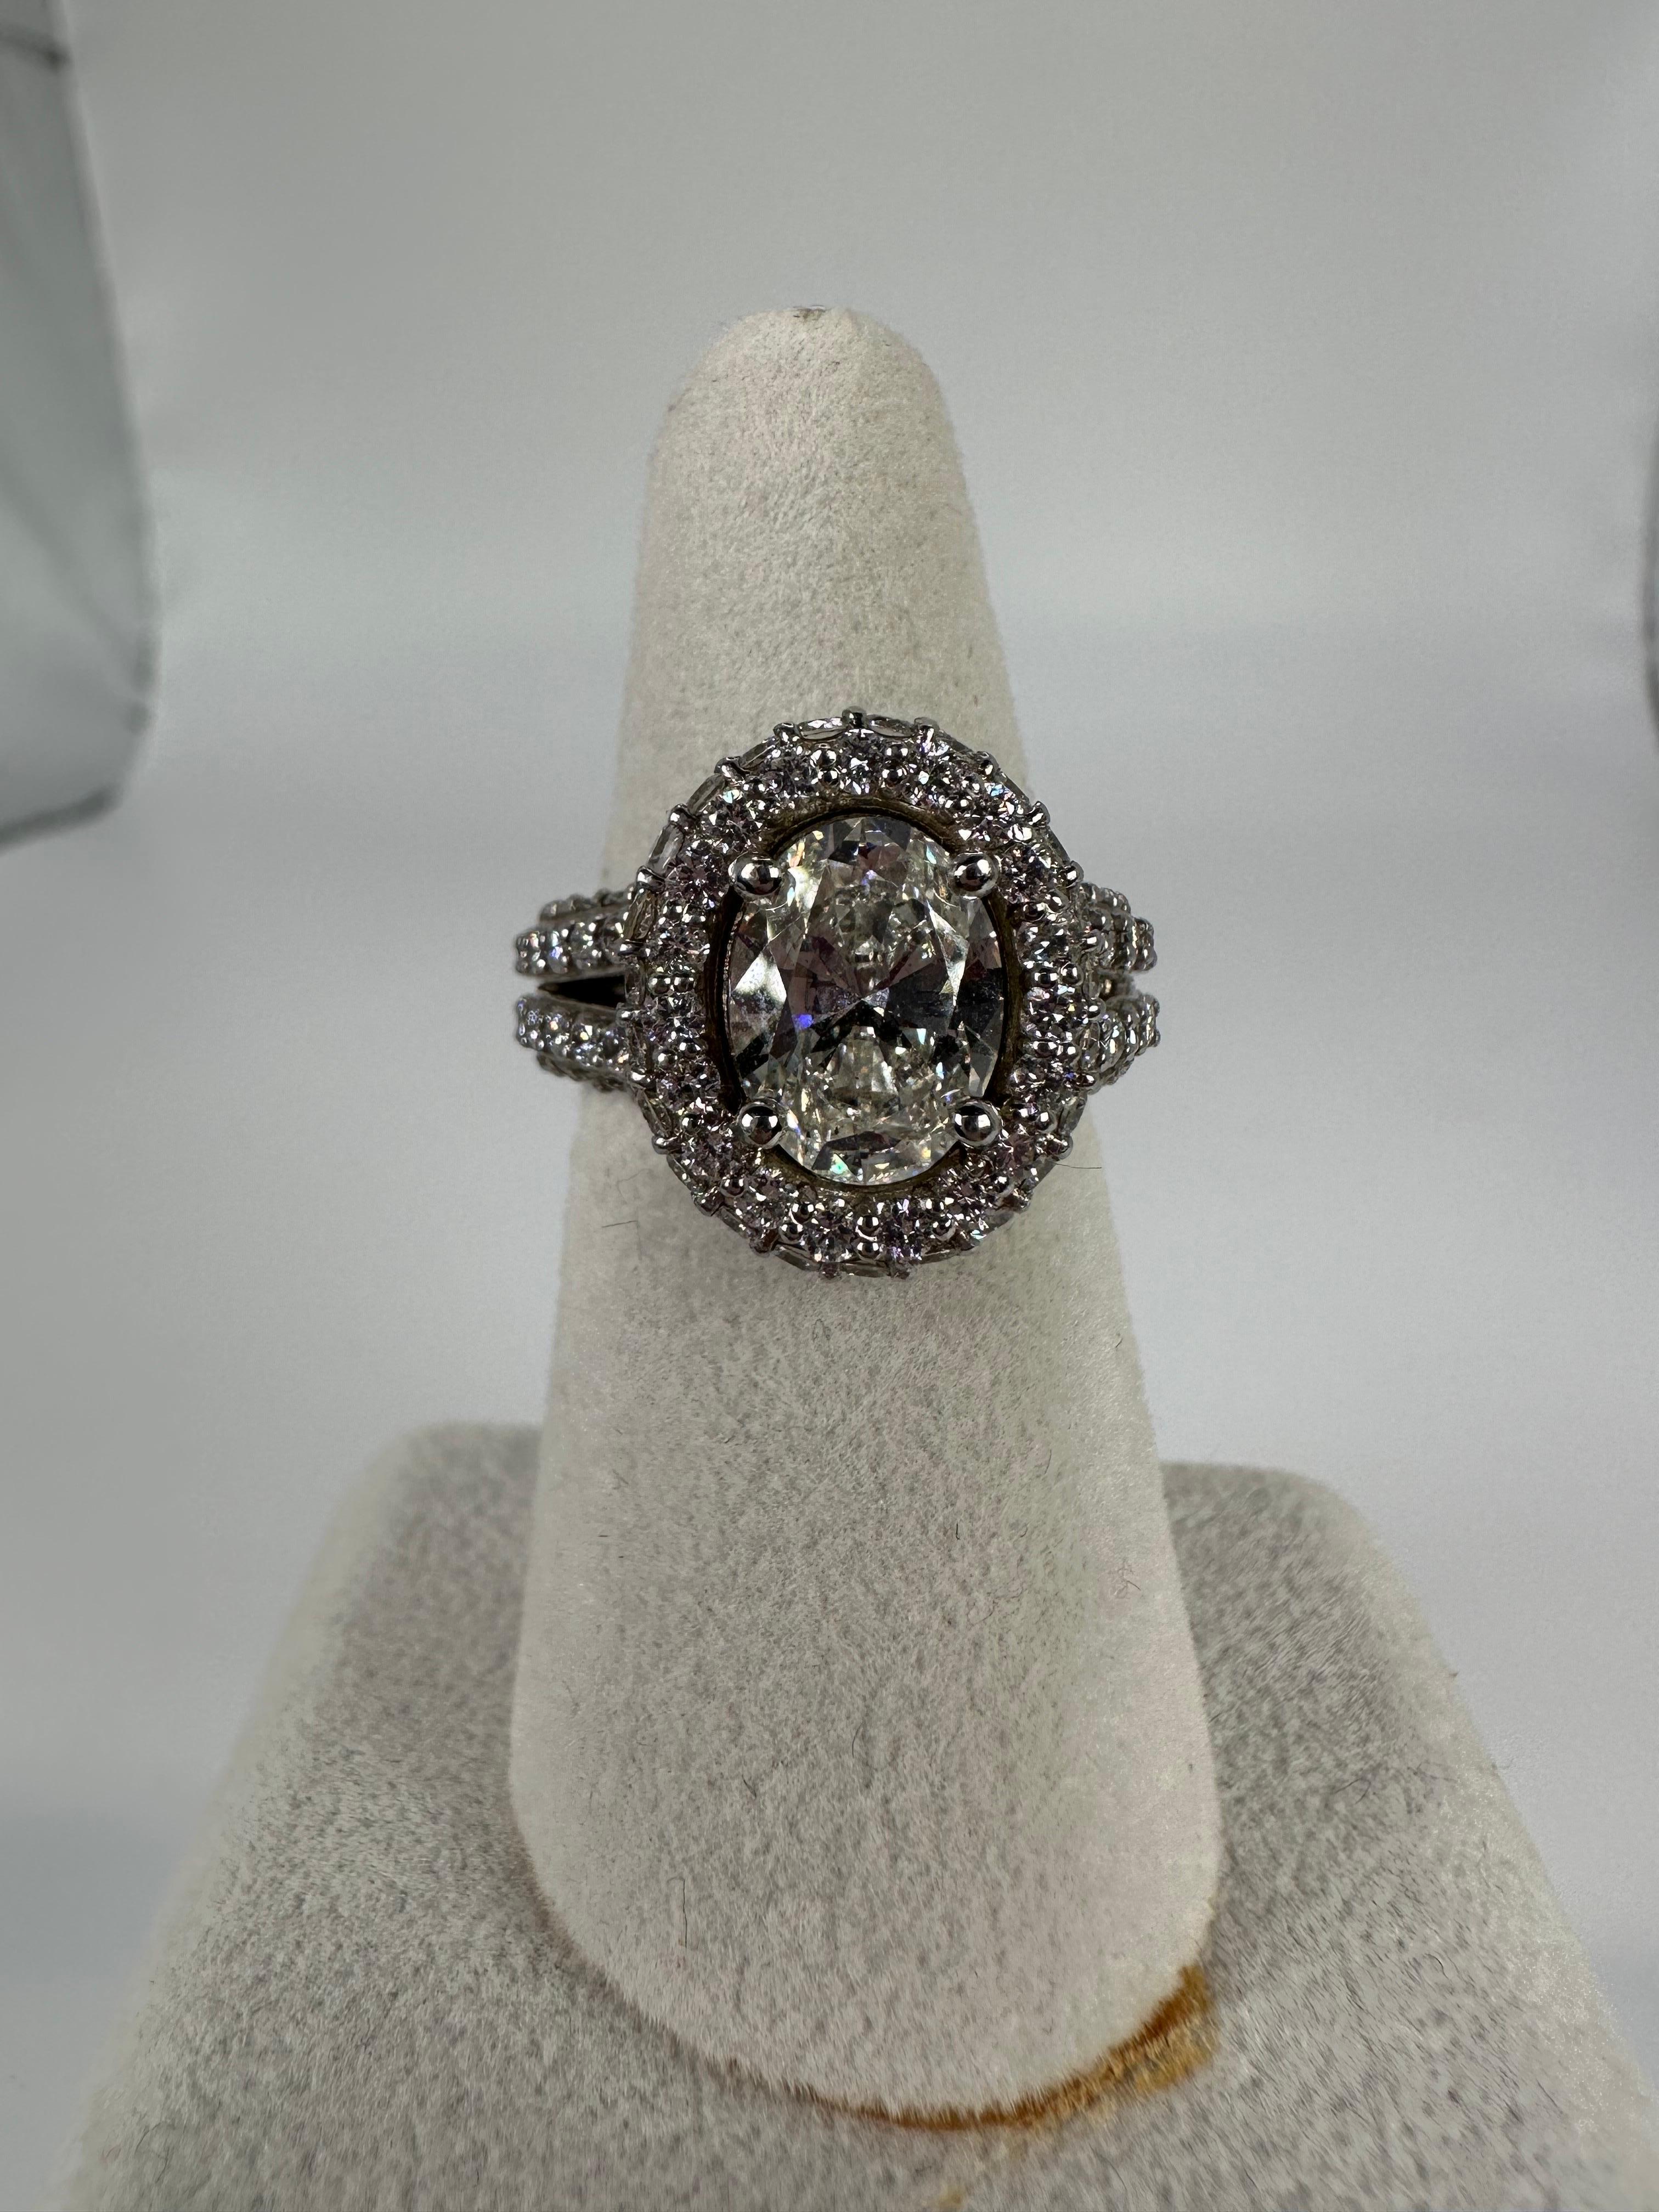 A very unique diamond & moissanite engagement ring, made with 2ct center moissanite and 2.18 carats of natural diamonds in pave setting all througout the ring, made in 14 Karat White gold with impeccable craftsmanship. This type of ring takes over 6